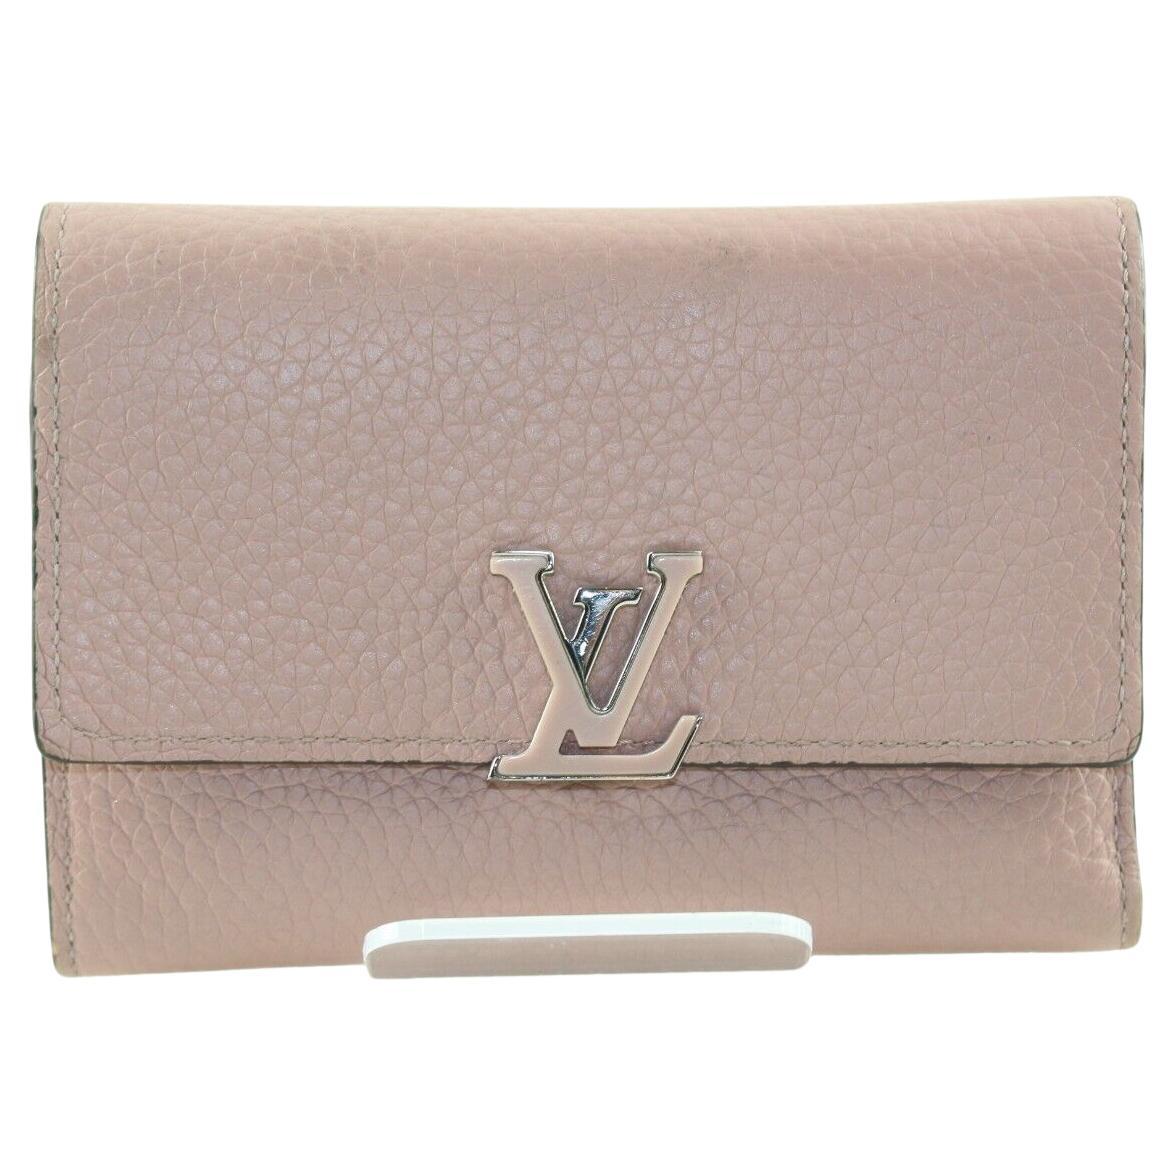 LOUIS VUITTON Blush Pink Taurillong Leather Capucines Wallet 1LV1219K For Sale